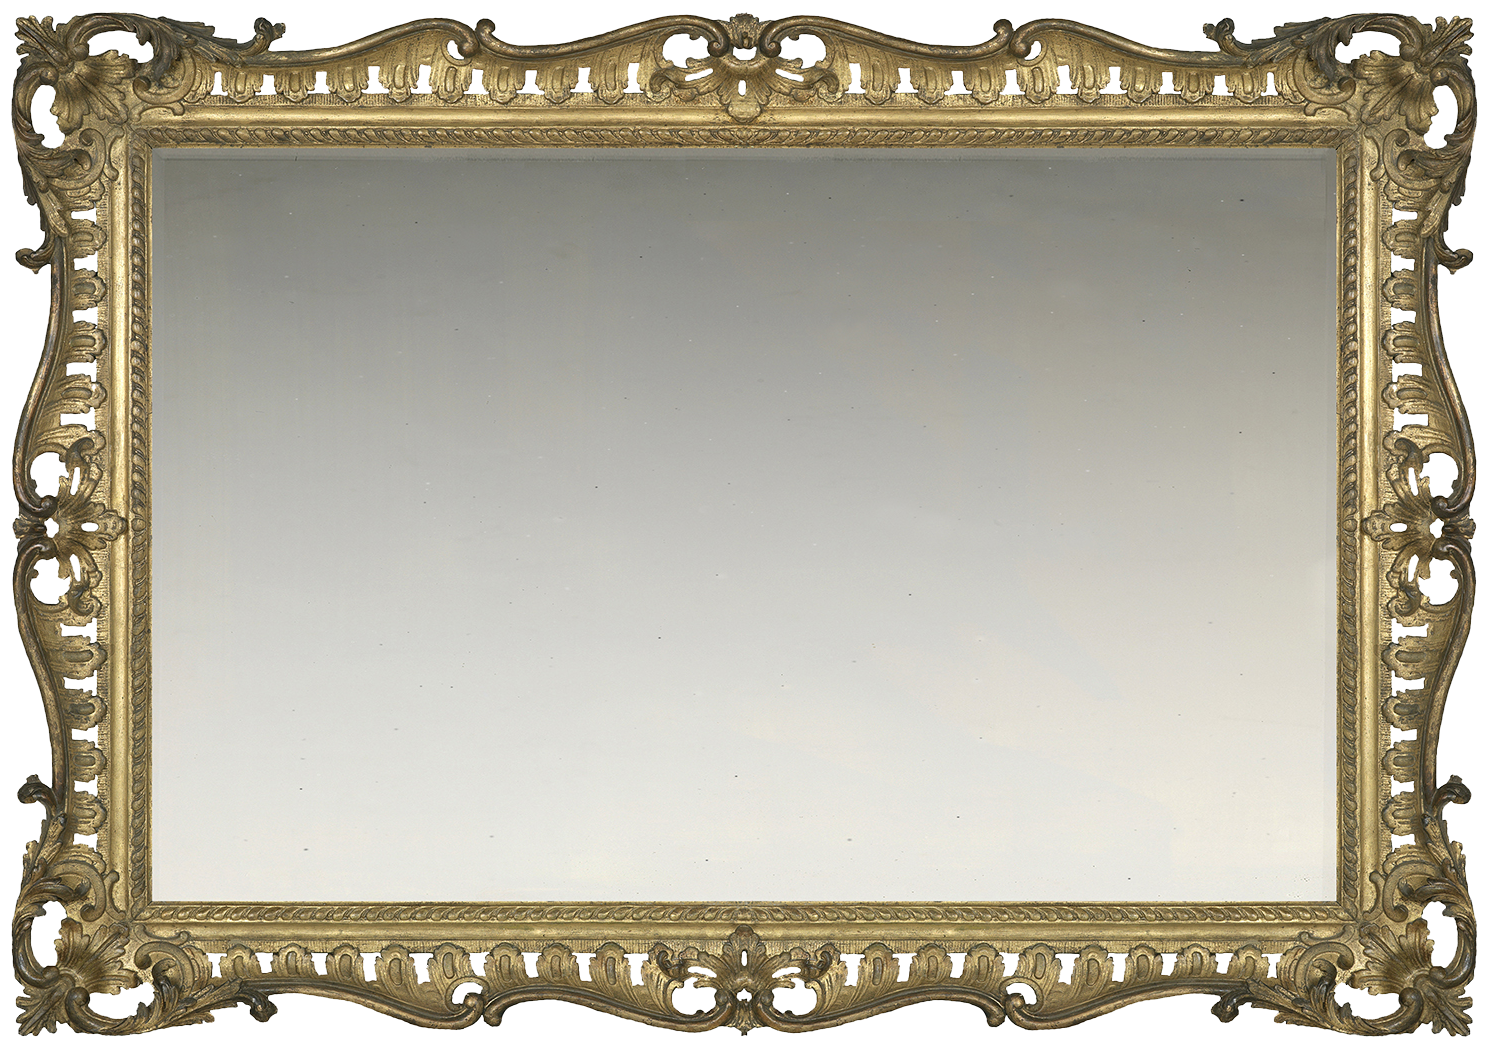 Mid-18th century hand carved British Rococo frame